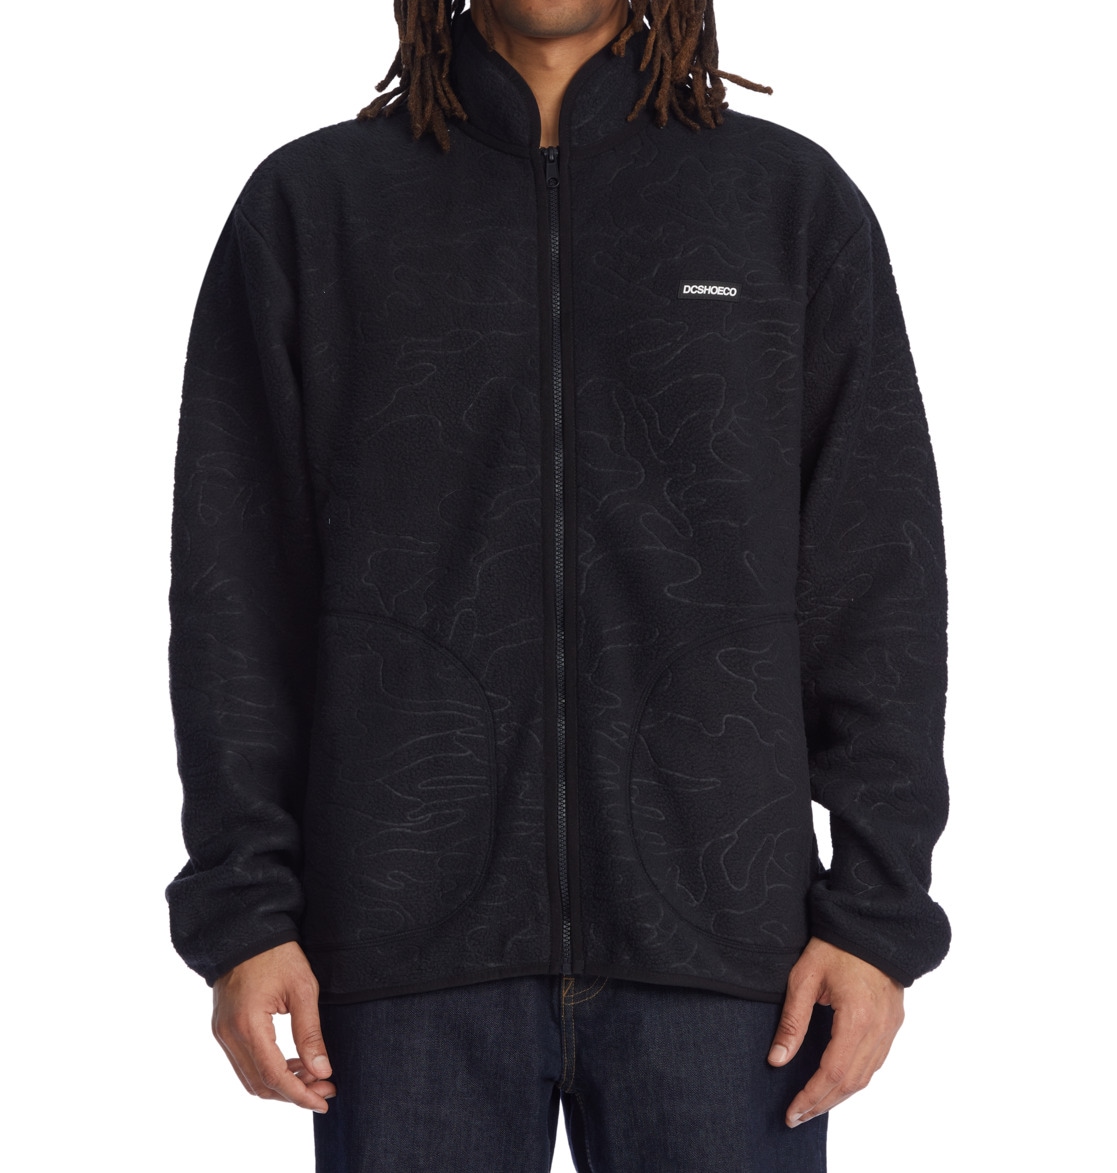 DC Shoes Fleecepullover "Outsider"